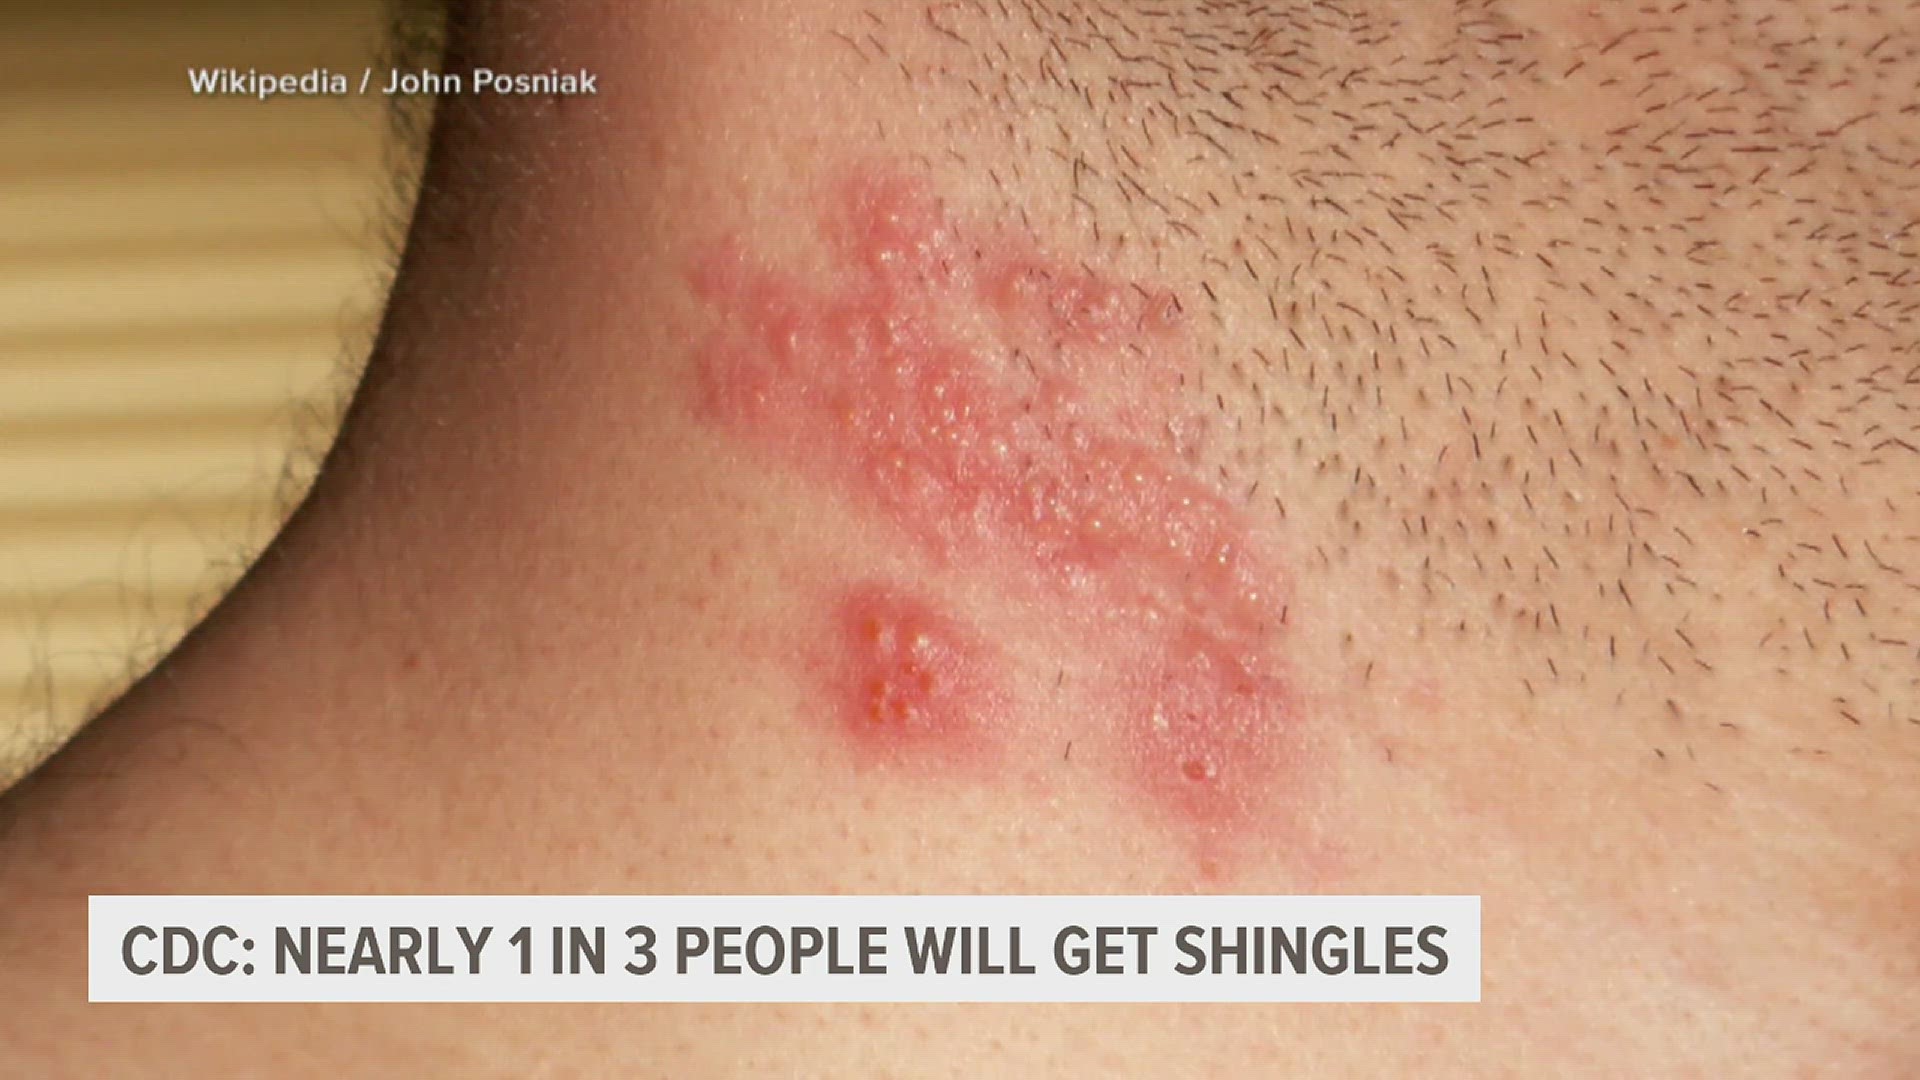 The same virus that causes chicken pox can stay inactive in the body and reactivate years later to cause shingles. Most common in adults, but kids can get it too.